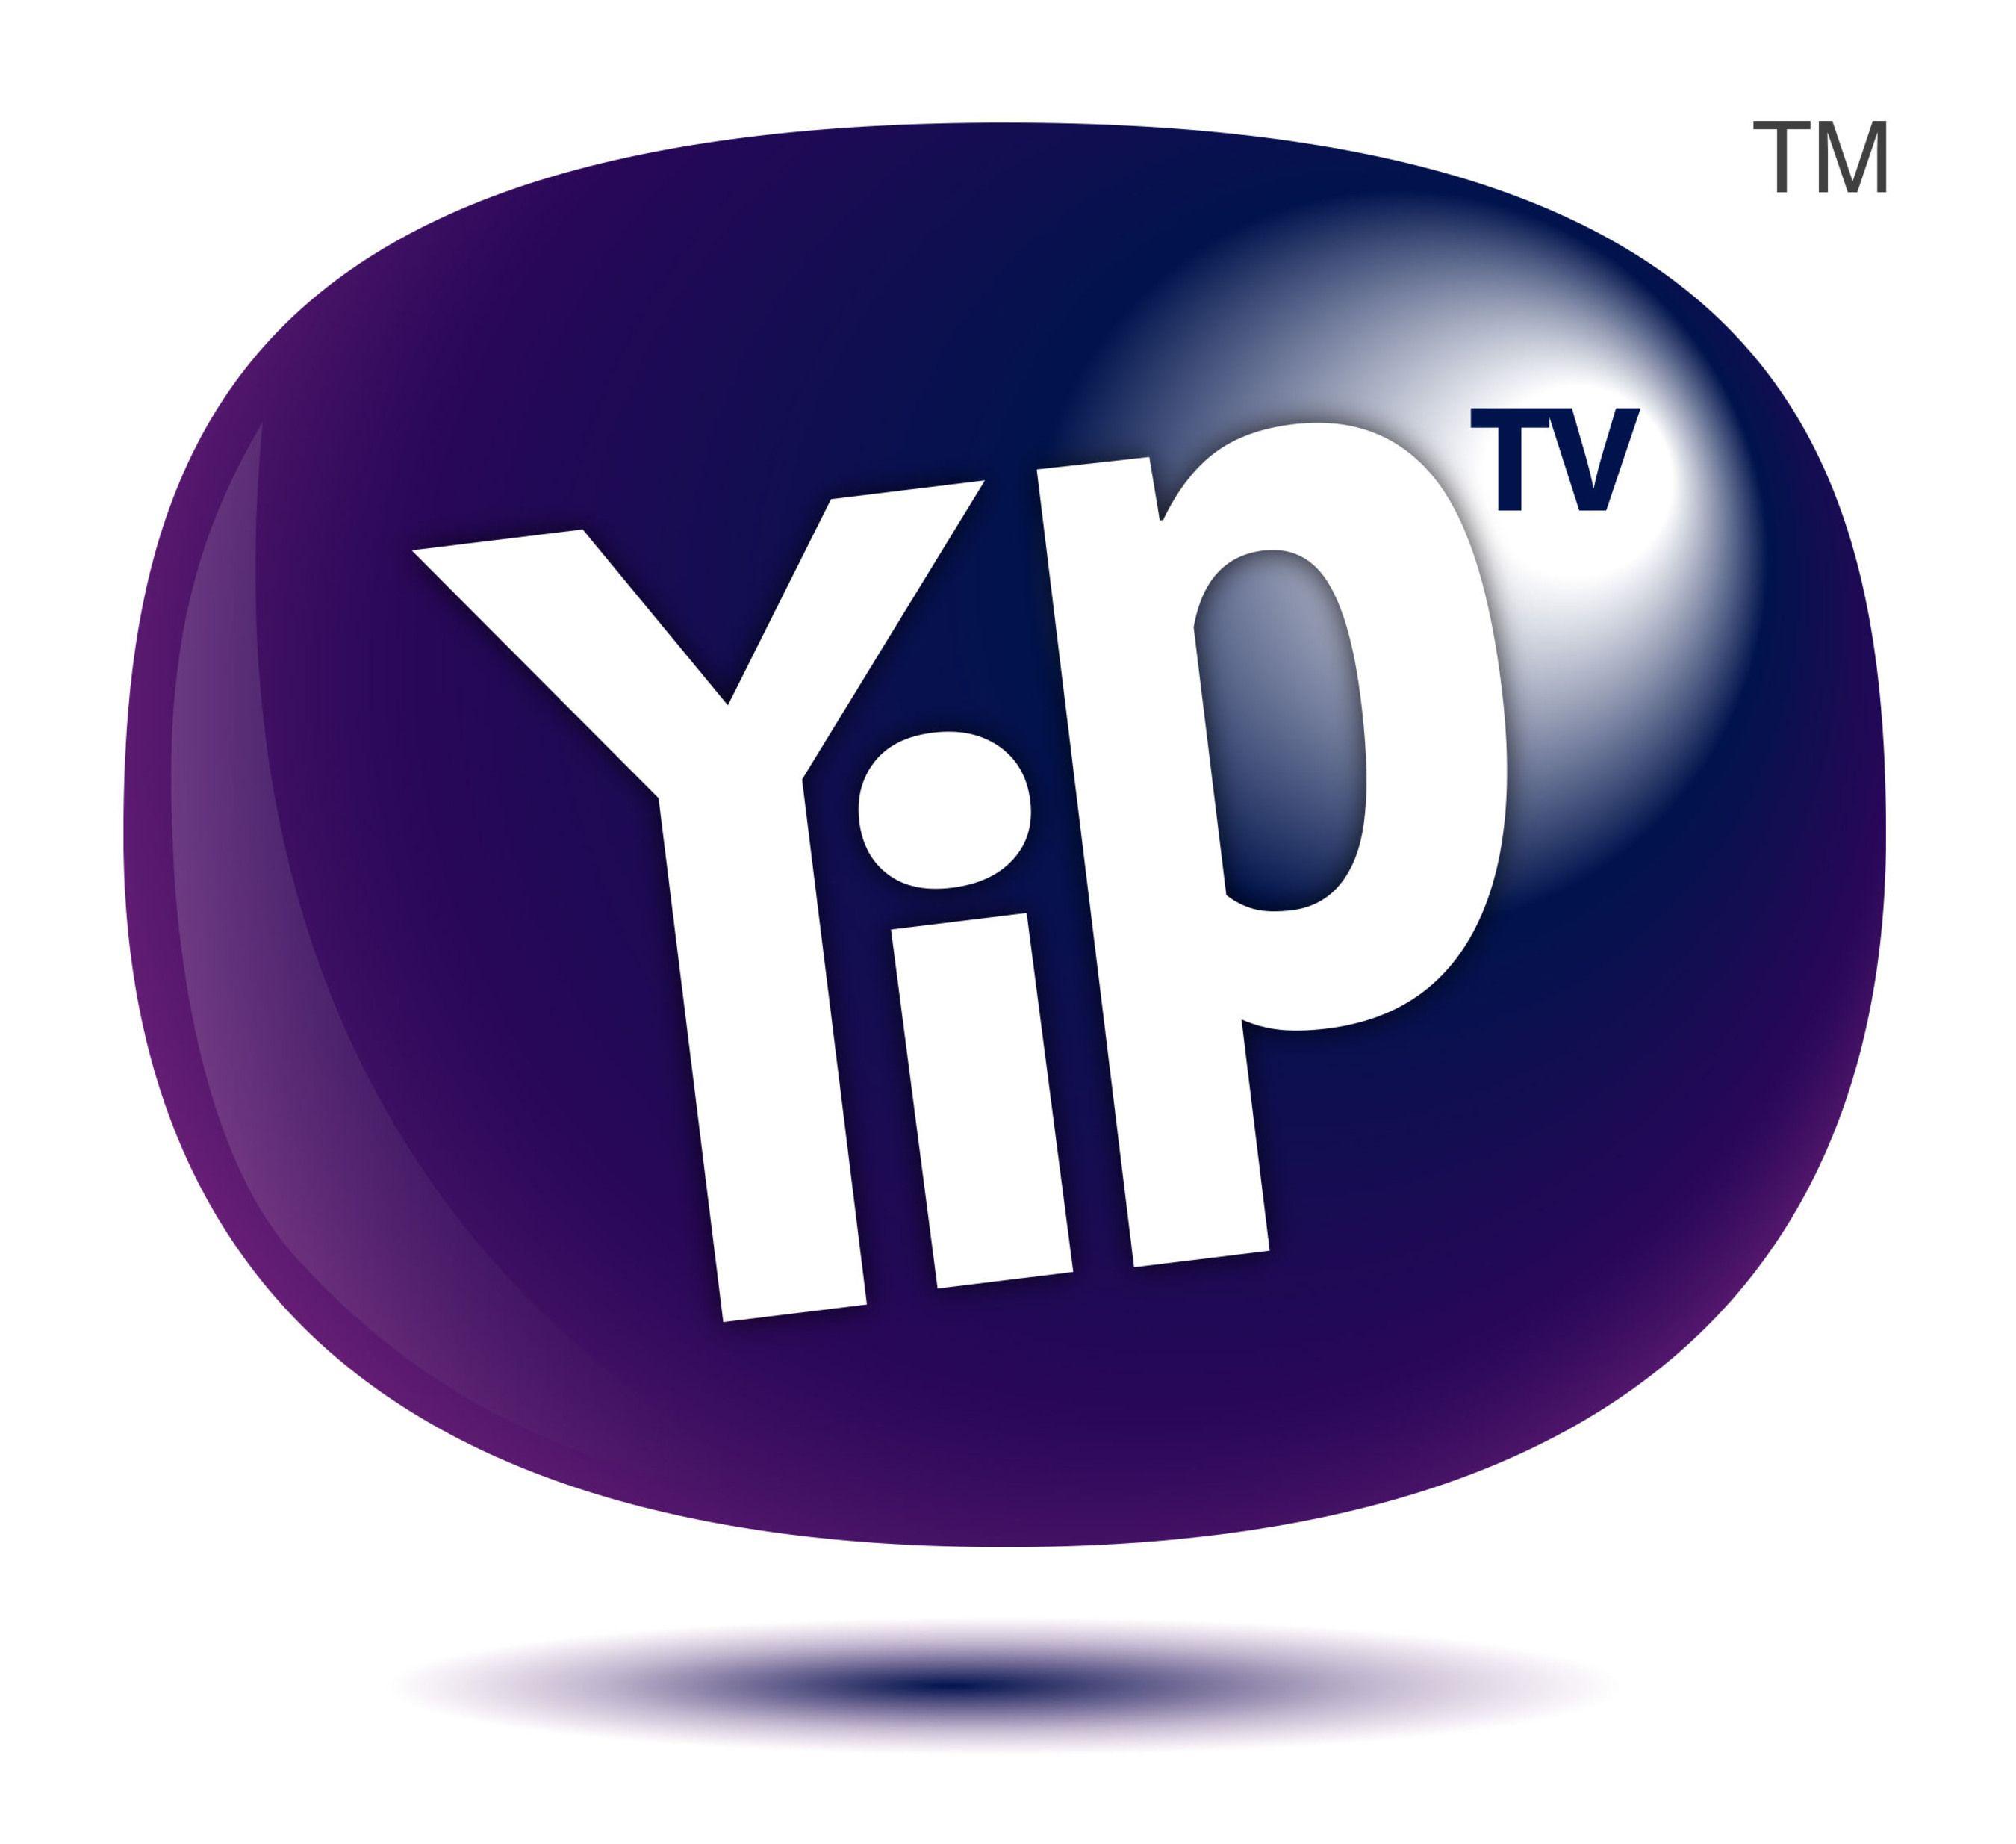 Spanish TV Channel Logo - Spanish Language Movie Channel Cine Sony Television Joins YipTV Line Up